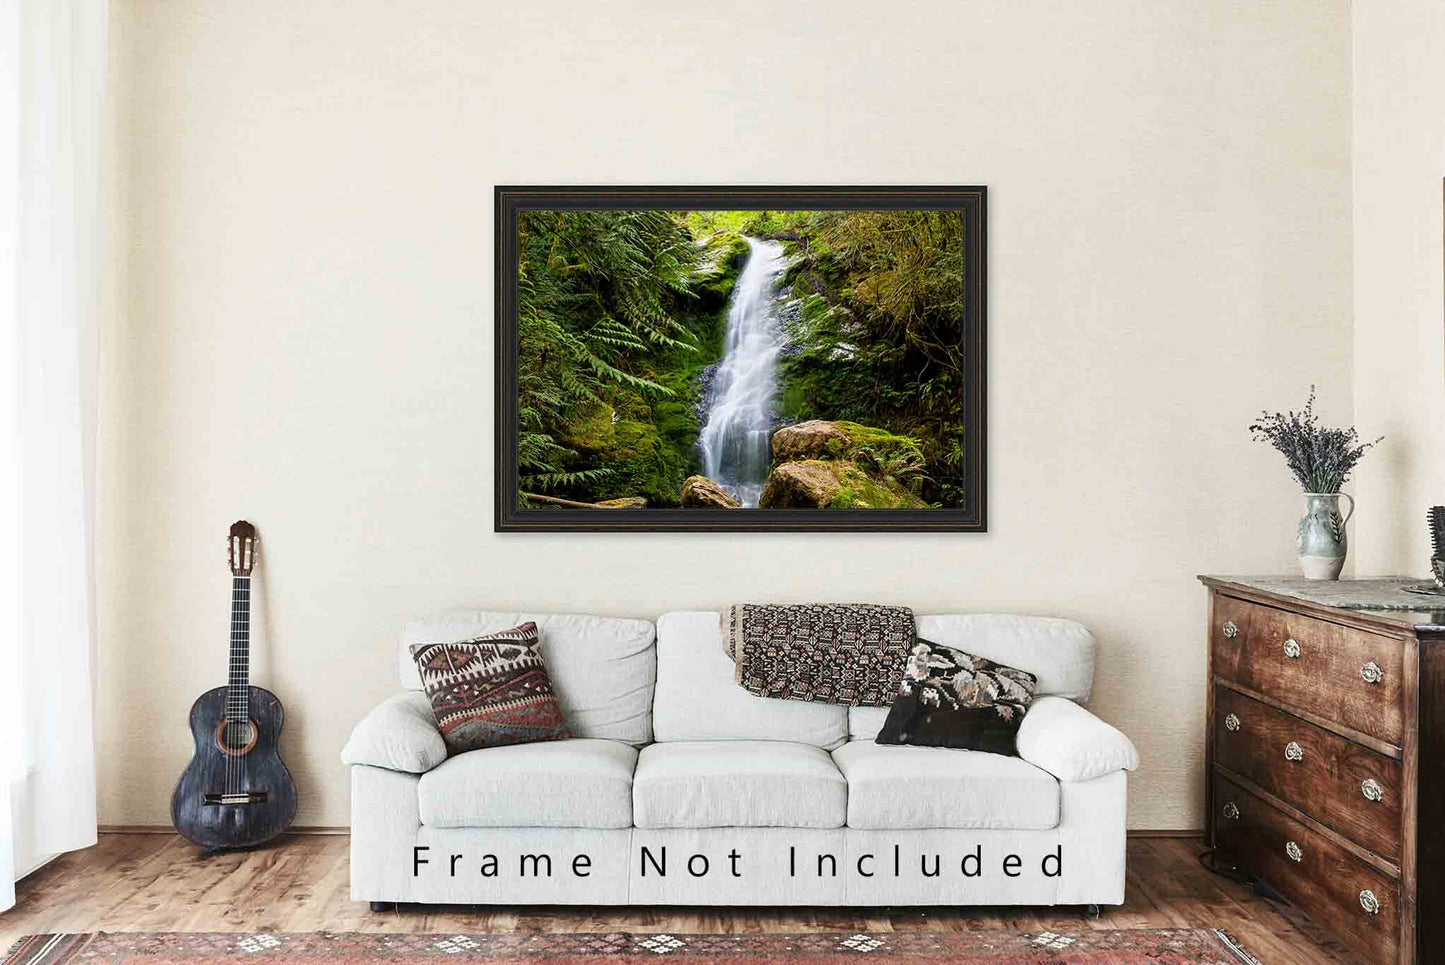 Waterfall Photography Print - Wall Art Picture of Merriman Falls in Quinault Rainforest in Washington State Pacific Northwest Nature Decor